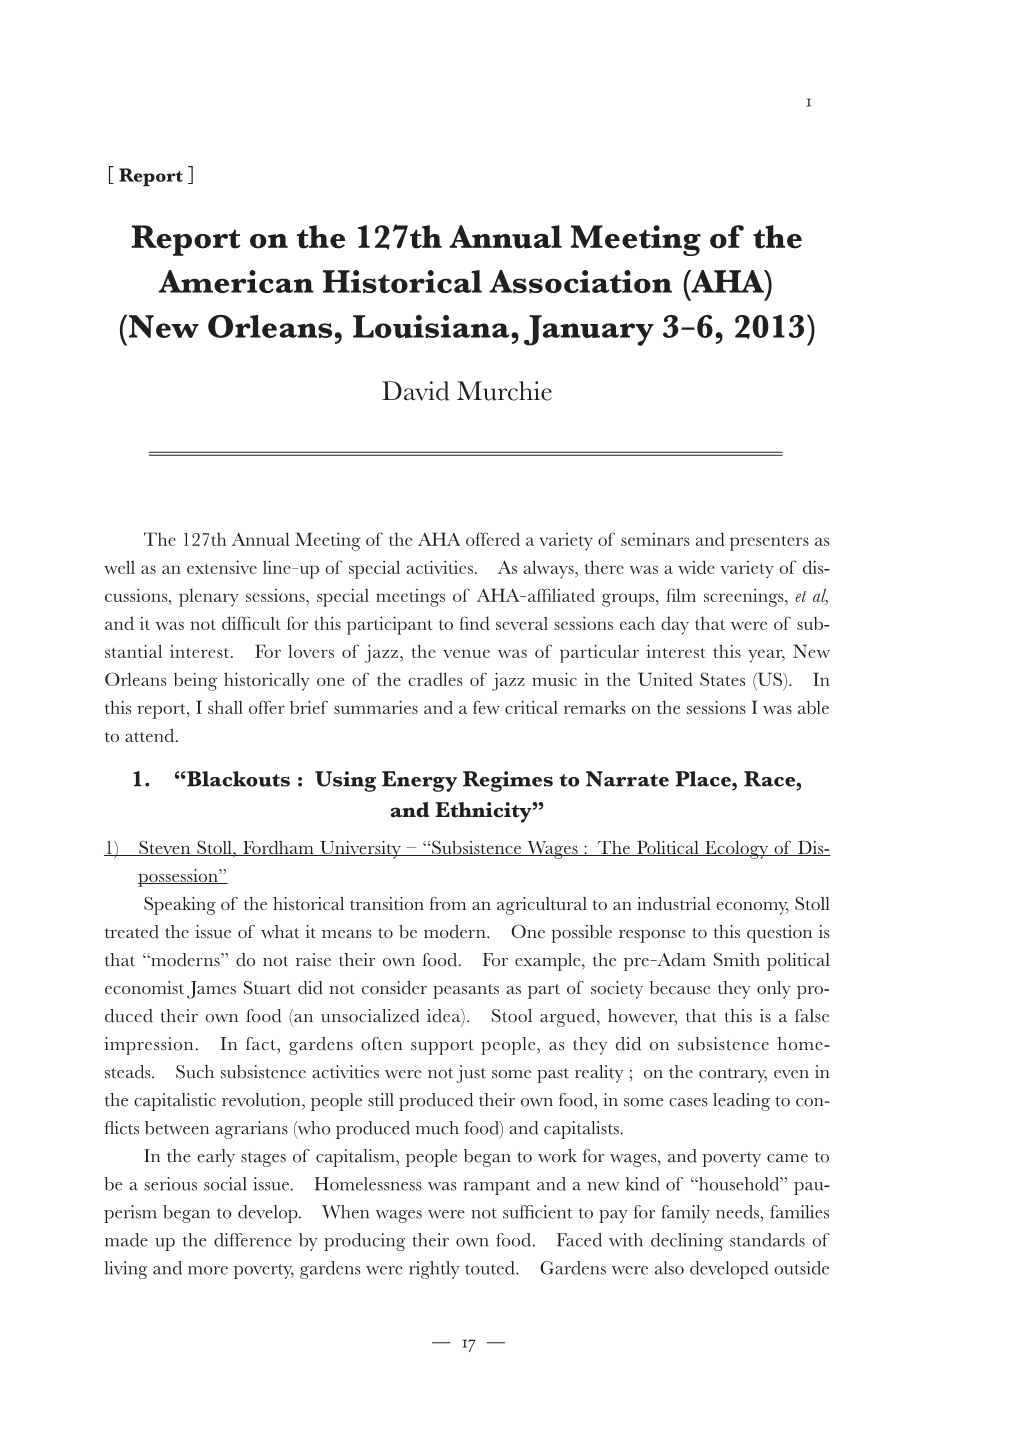 Report on the 127Th Annual Meeting of the American Historical Association (AHA) (New Orleans, Louisiana, January 3-6, 2013)